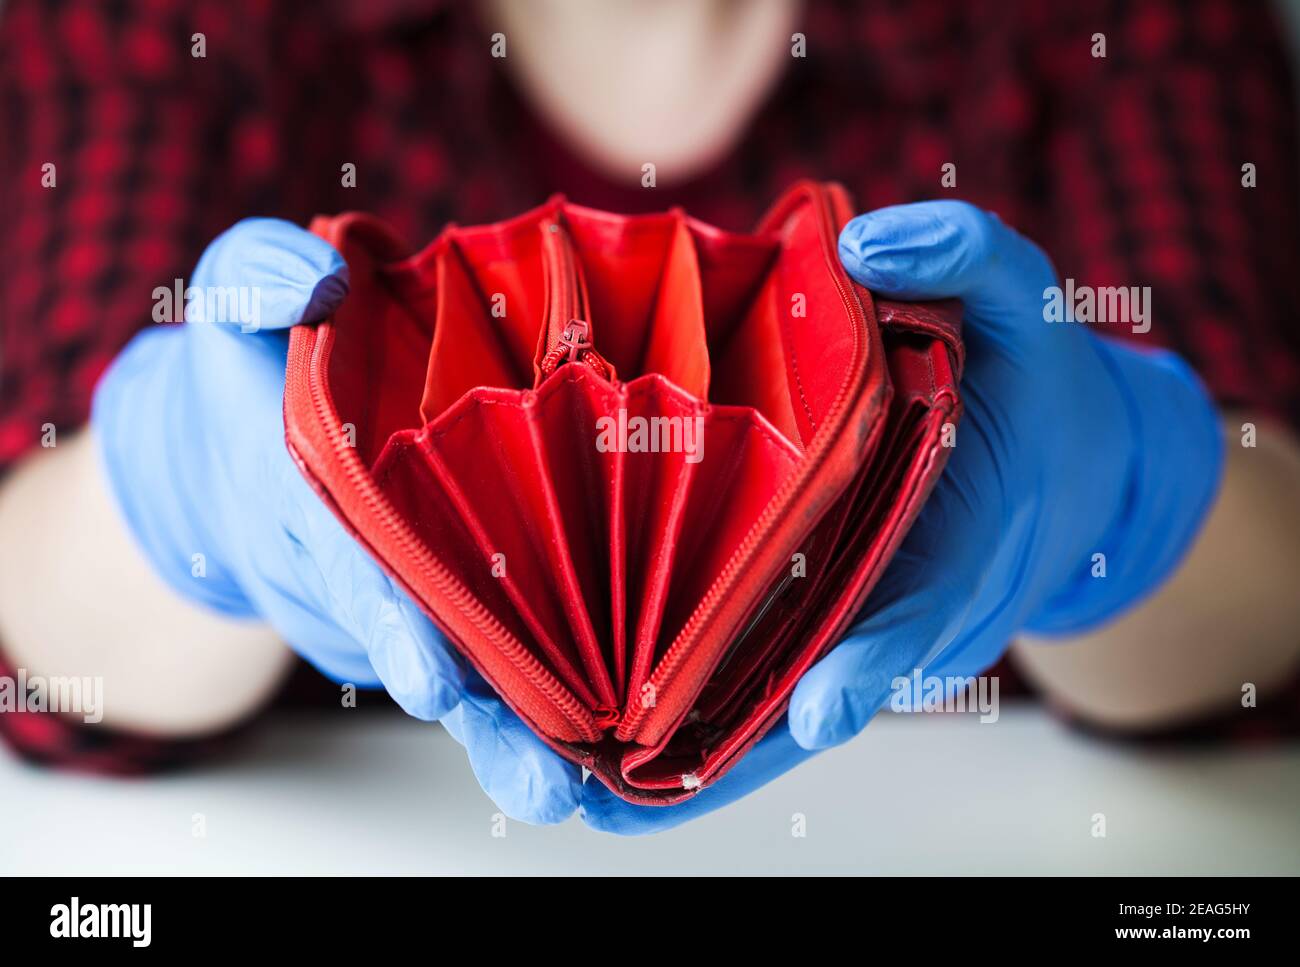 Person wearing medical protective gloves holding empty red wallet,economic crisis & recession due to global Coronavirus COVID-19 pandemic situation,so Stock Photo